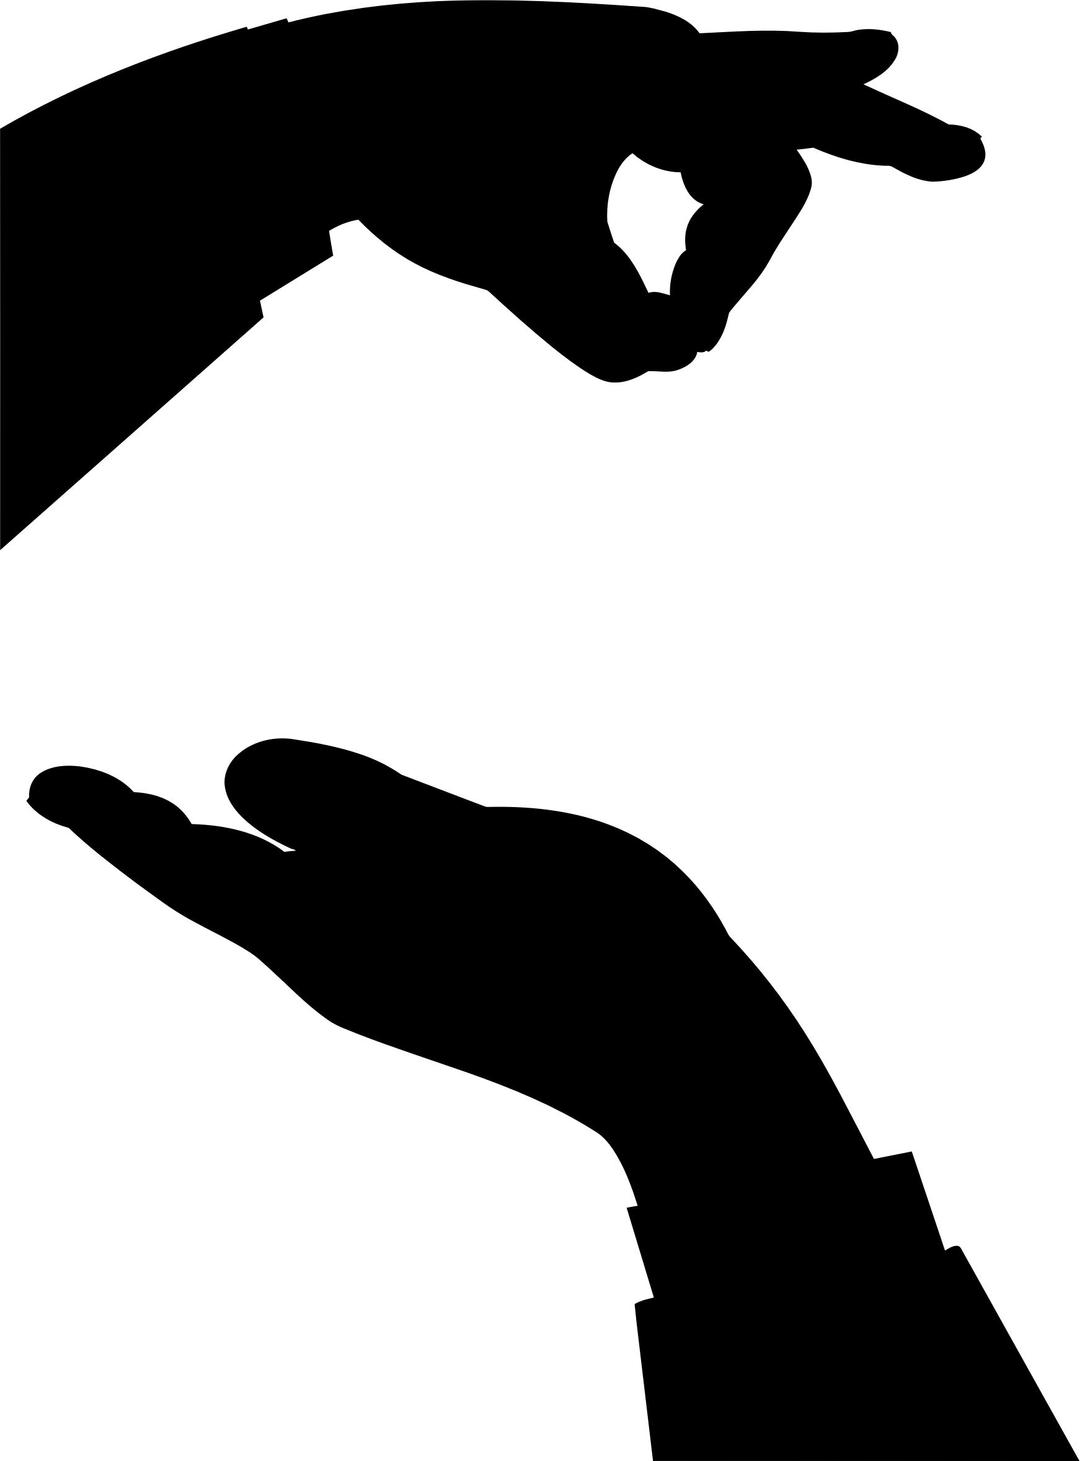 Hands Silhouette png transparent